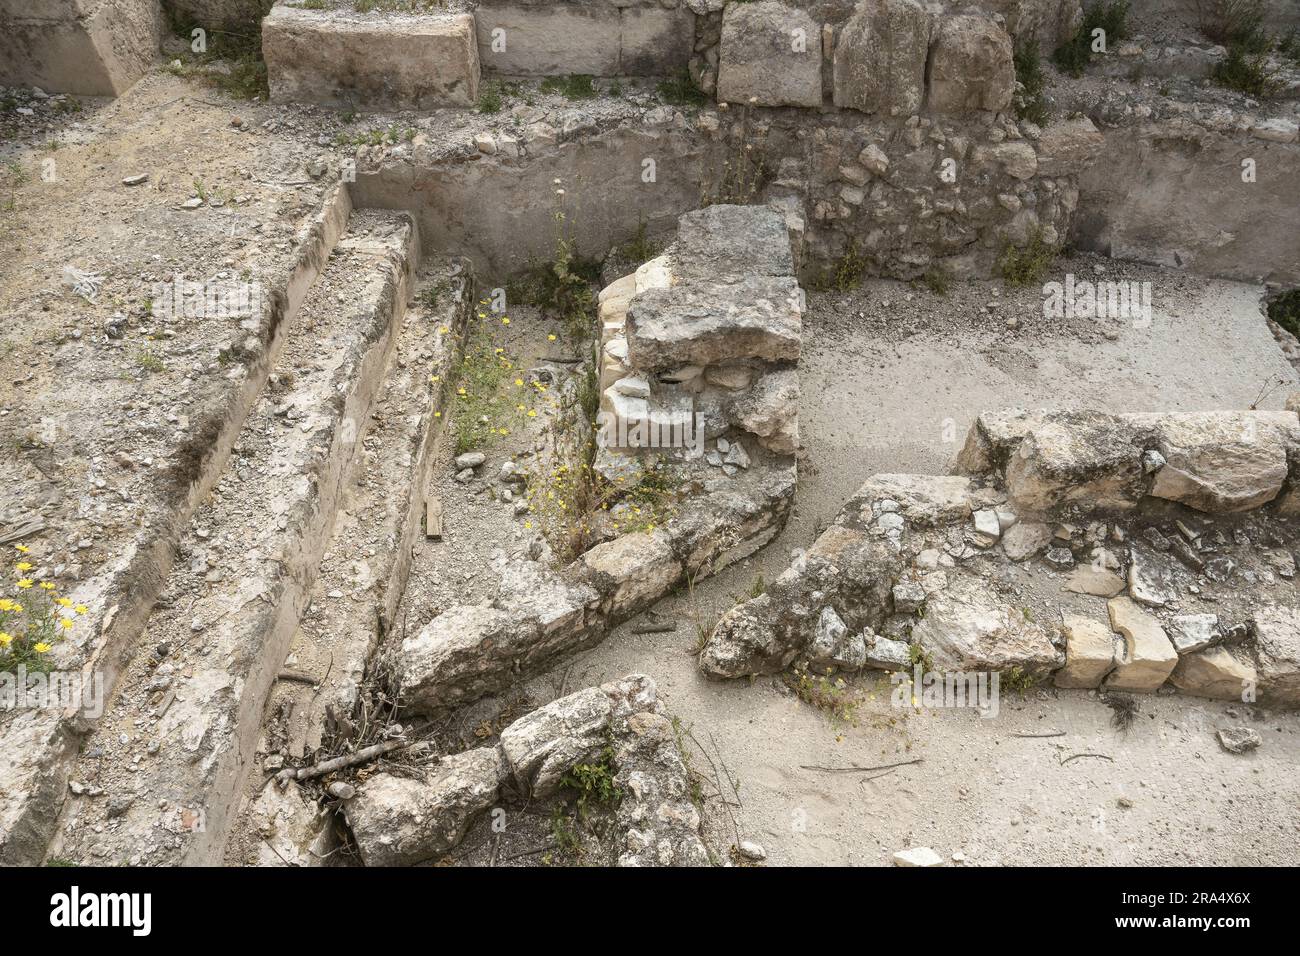 section of the ancient Roman Bathhouse at Beit Guvrin park in Israel showing water channels made with limestone blocks Stock Photo